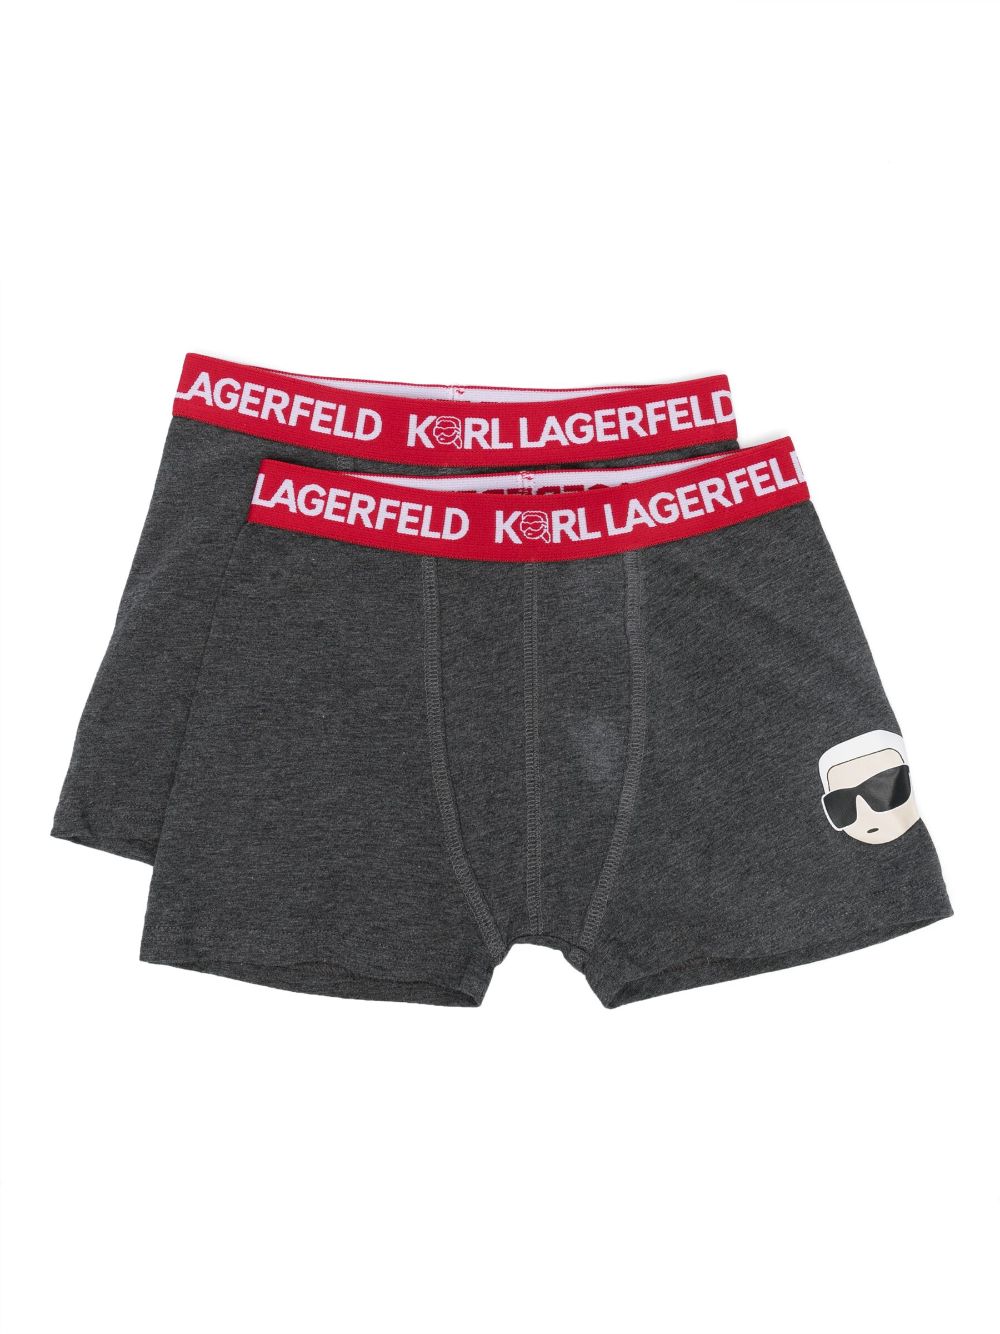 Image 1 of Karl Lagerfeld Kids logo-waistband briefs (pack of two)